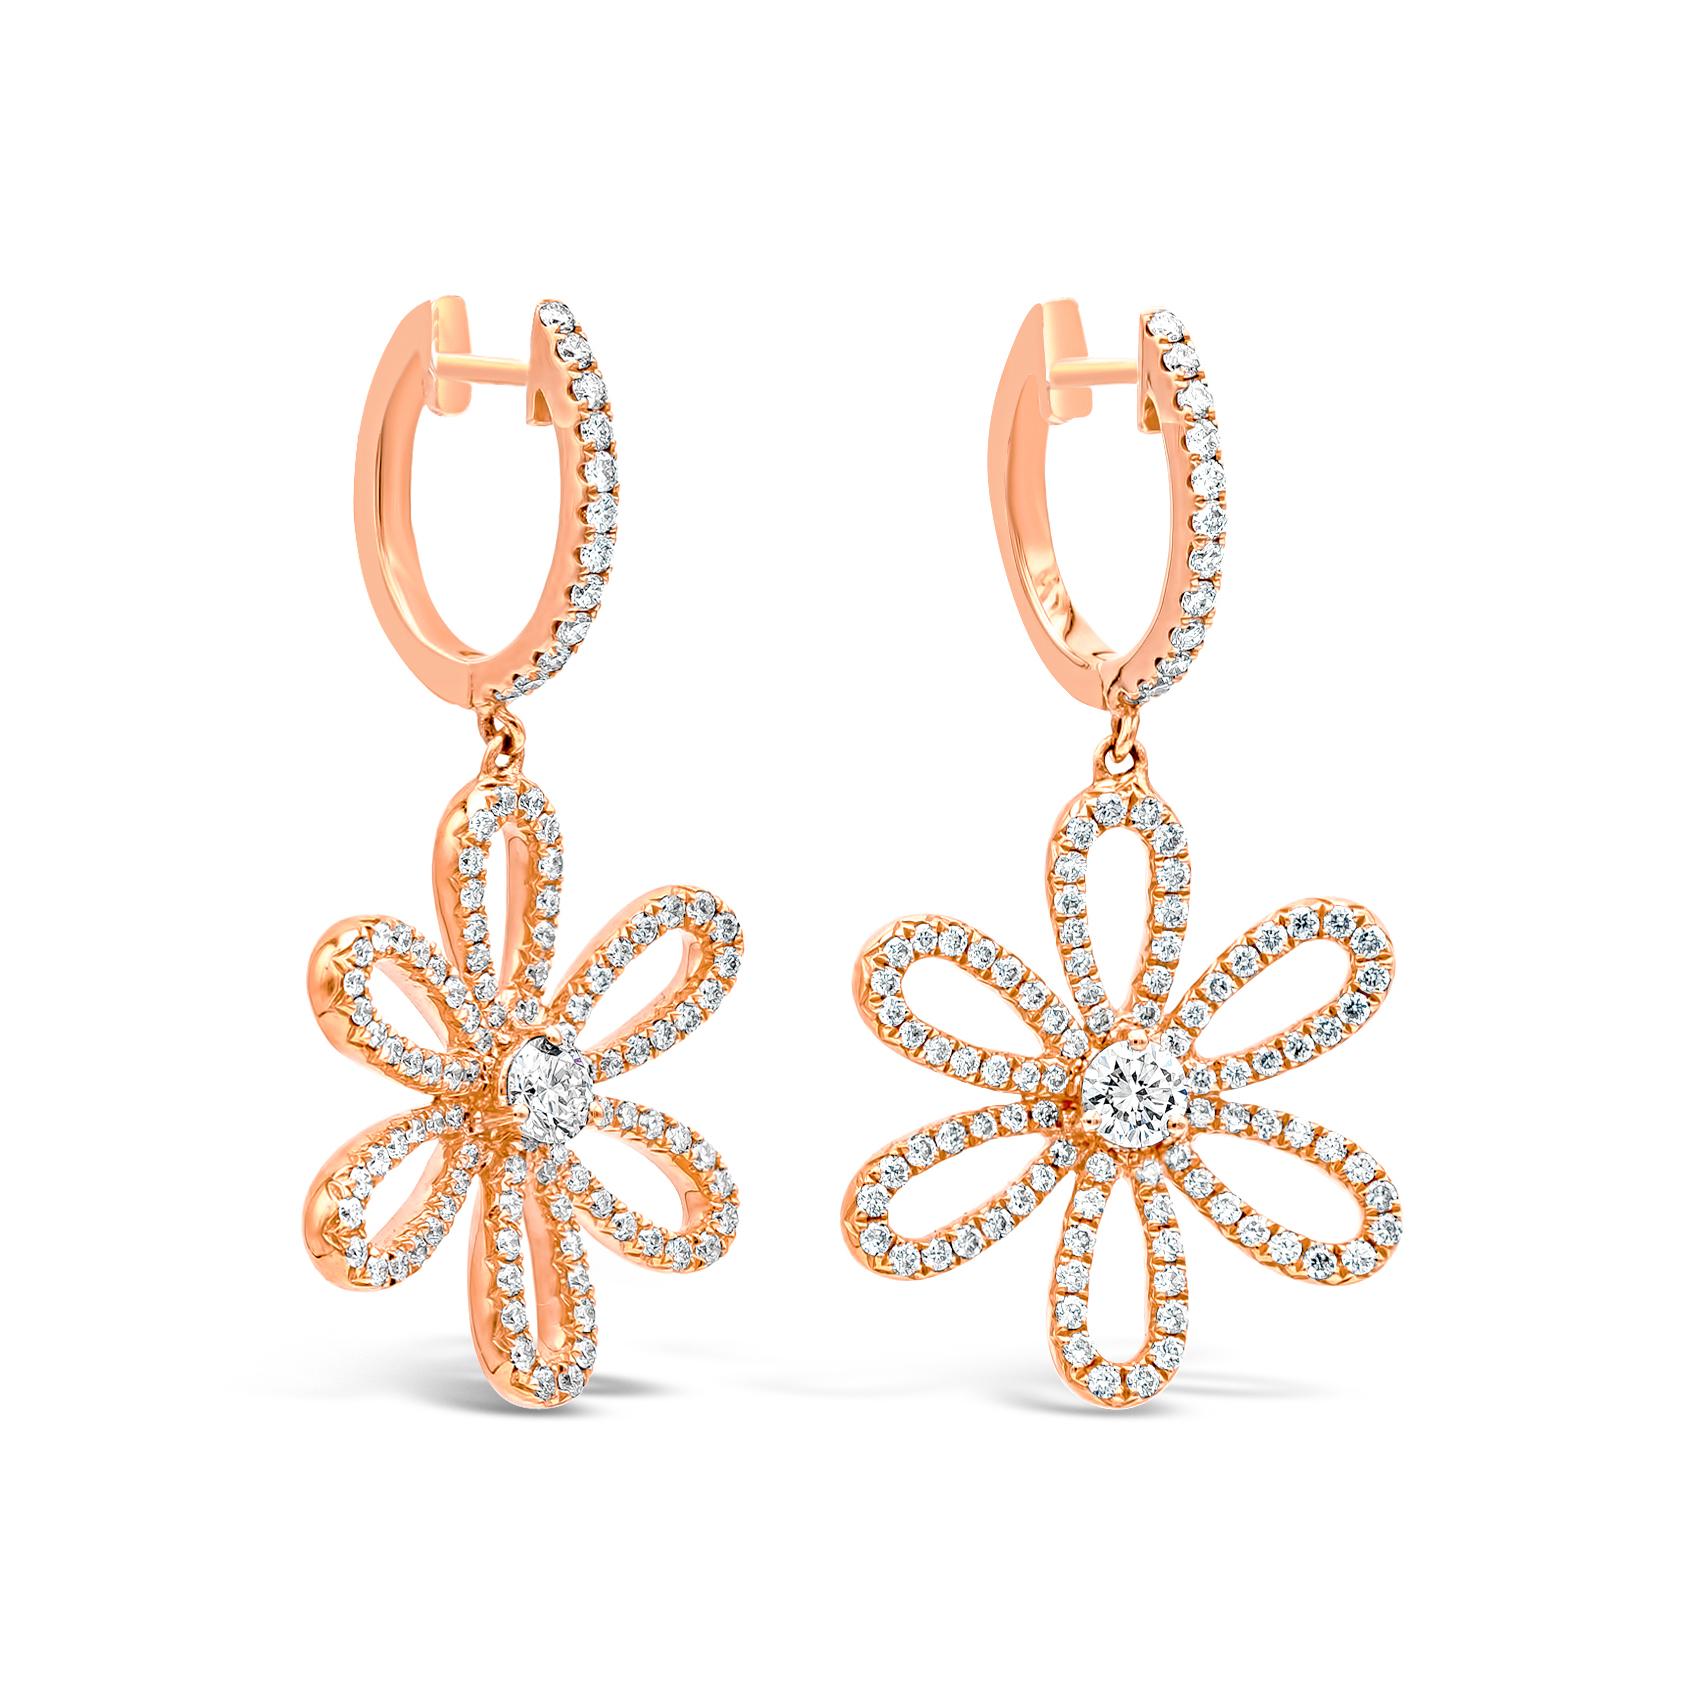 A fashionable pair of dangling earrings, showcasing round brilliant diamonds weighing 1.02 carats total with E-F color and VS-VVS clarity. This beautiful piece of jewelry is set in an elegant flower design made of 18K rose gold.

Roman Malakov is a